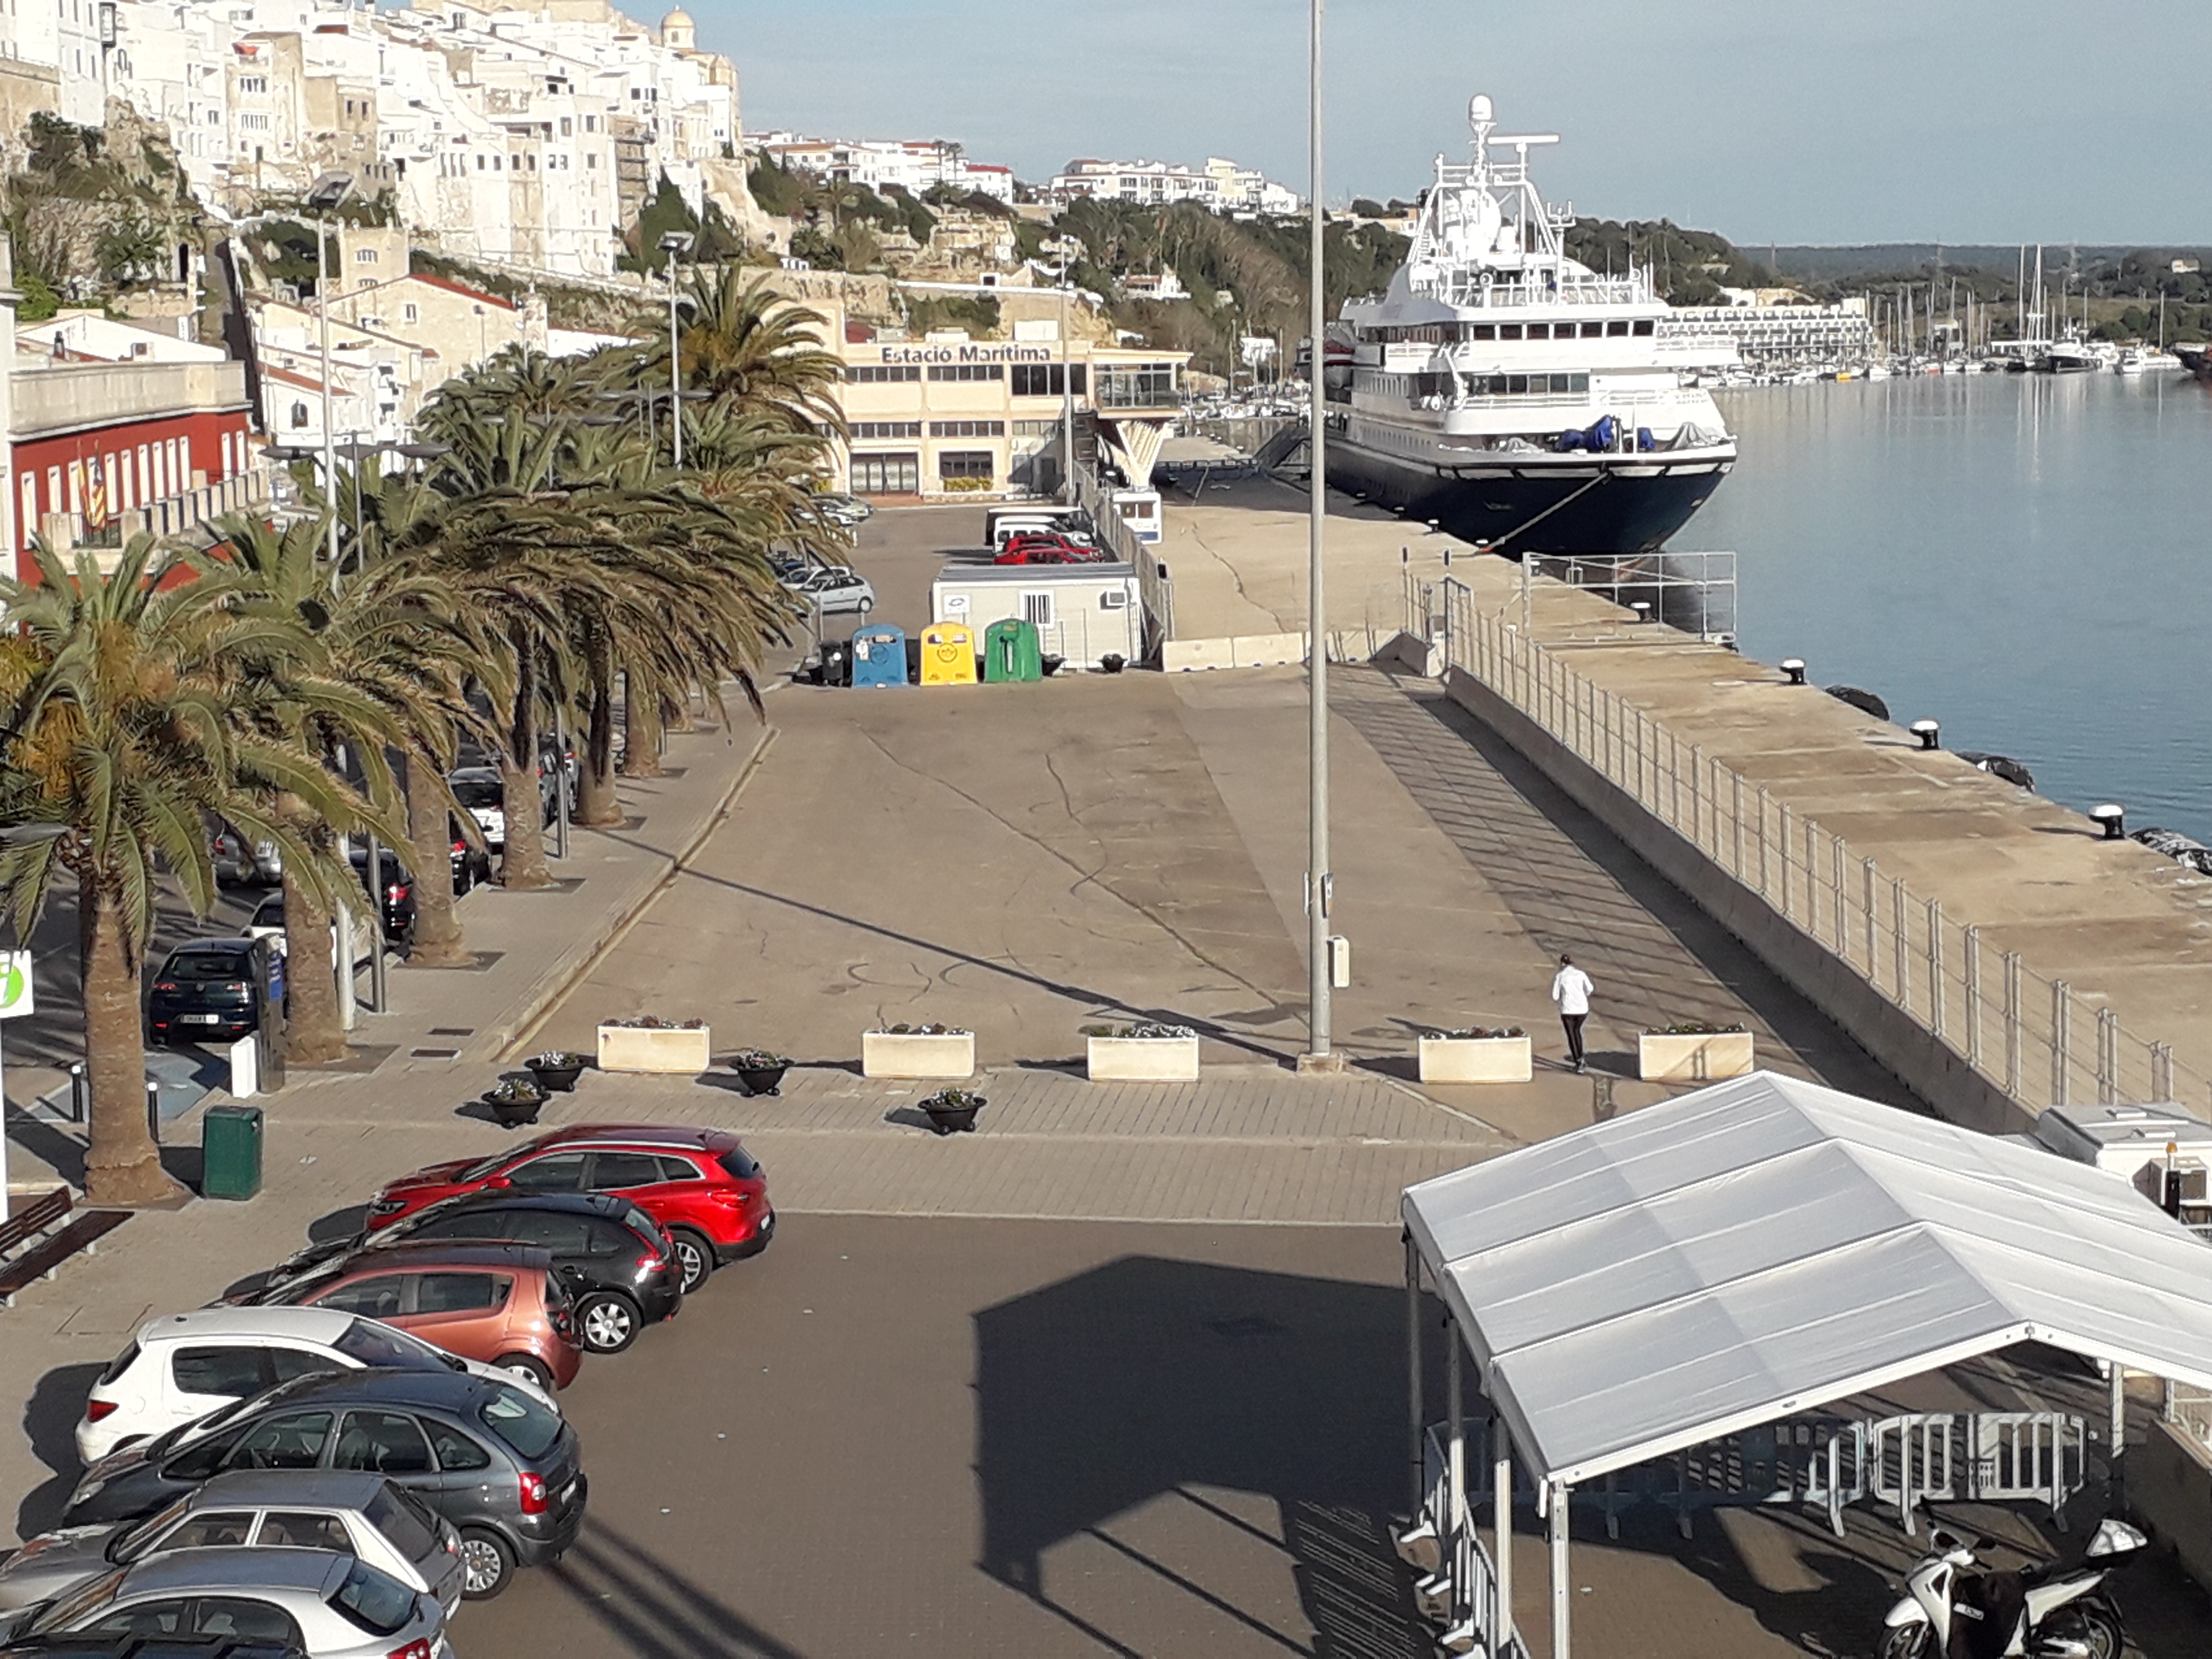 THE APB WILL BEGIN IMPROVEMENT WORKS IN SEPTEMBER ON THE CRUISE SHIP DOCK AT THE PORT OF MAHON